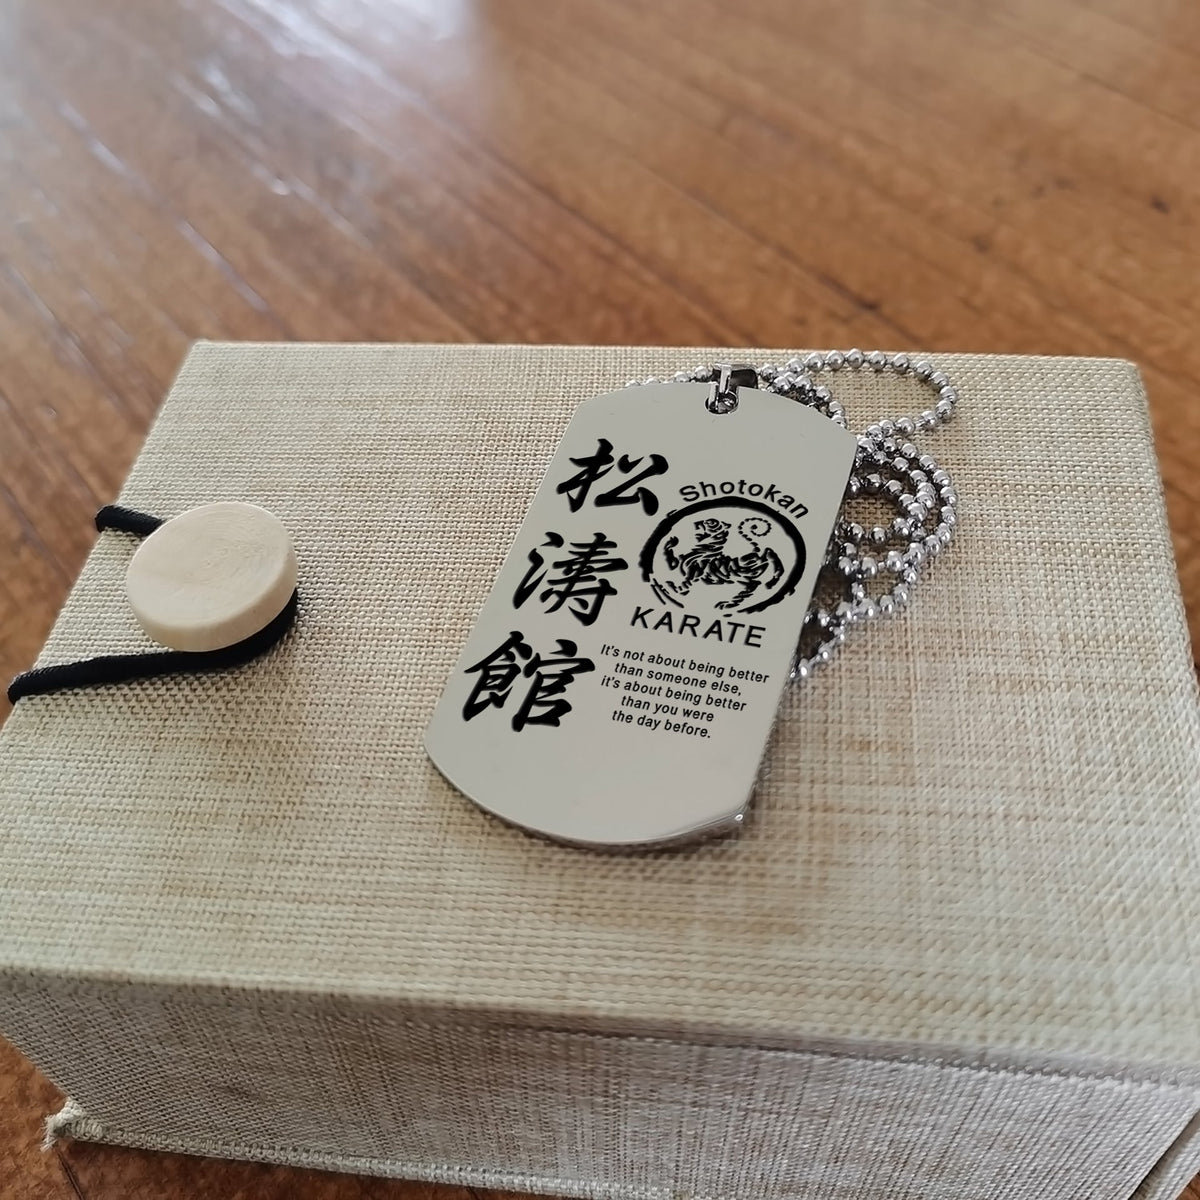 KAD001 - It’s Not About Being Better Than Someone Else - It’s About Being Better Than You Were The Day Before - Shotokan Karate - Engrave Silver Dogtag